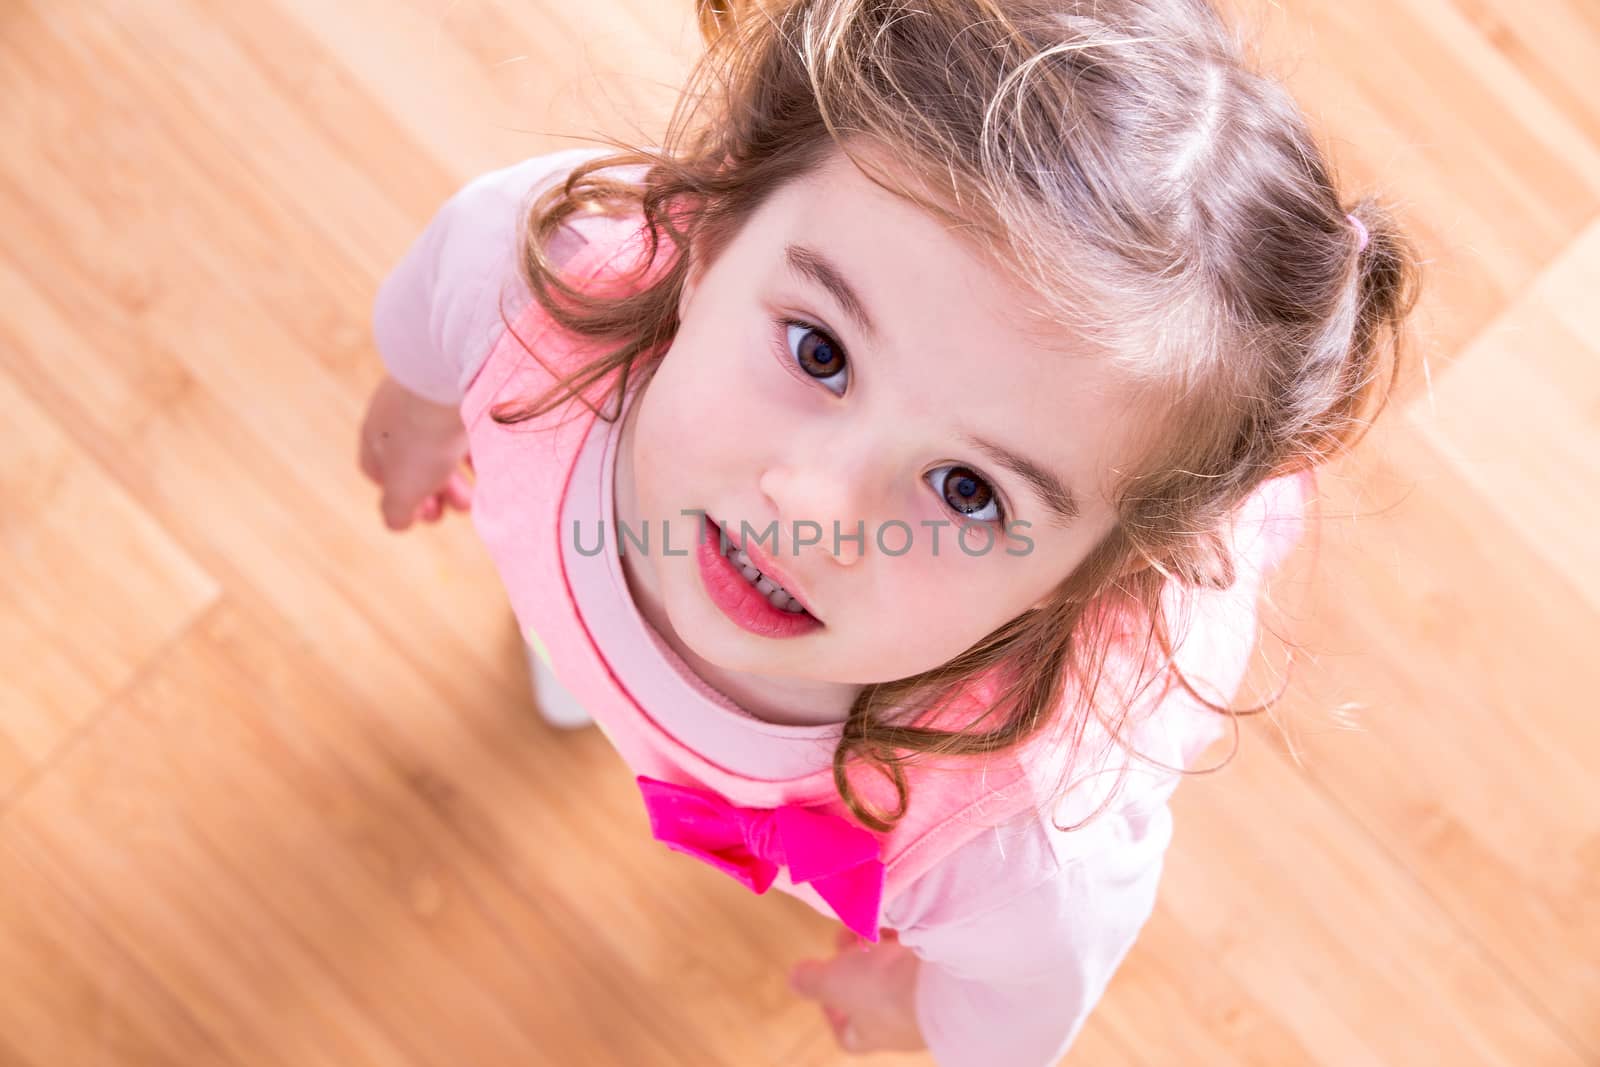 Pretty little girl with curly hair and beseeching eyes standing looking up into the camera as she asks for something that she wants, view looking down into her face with wood floor background